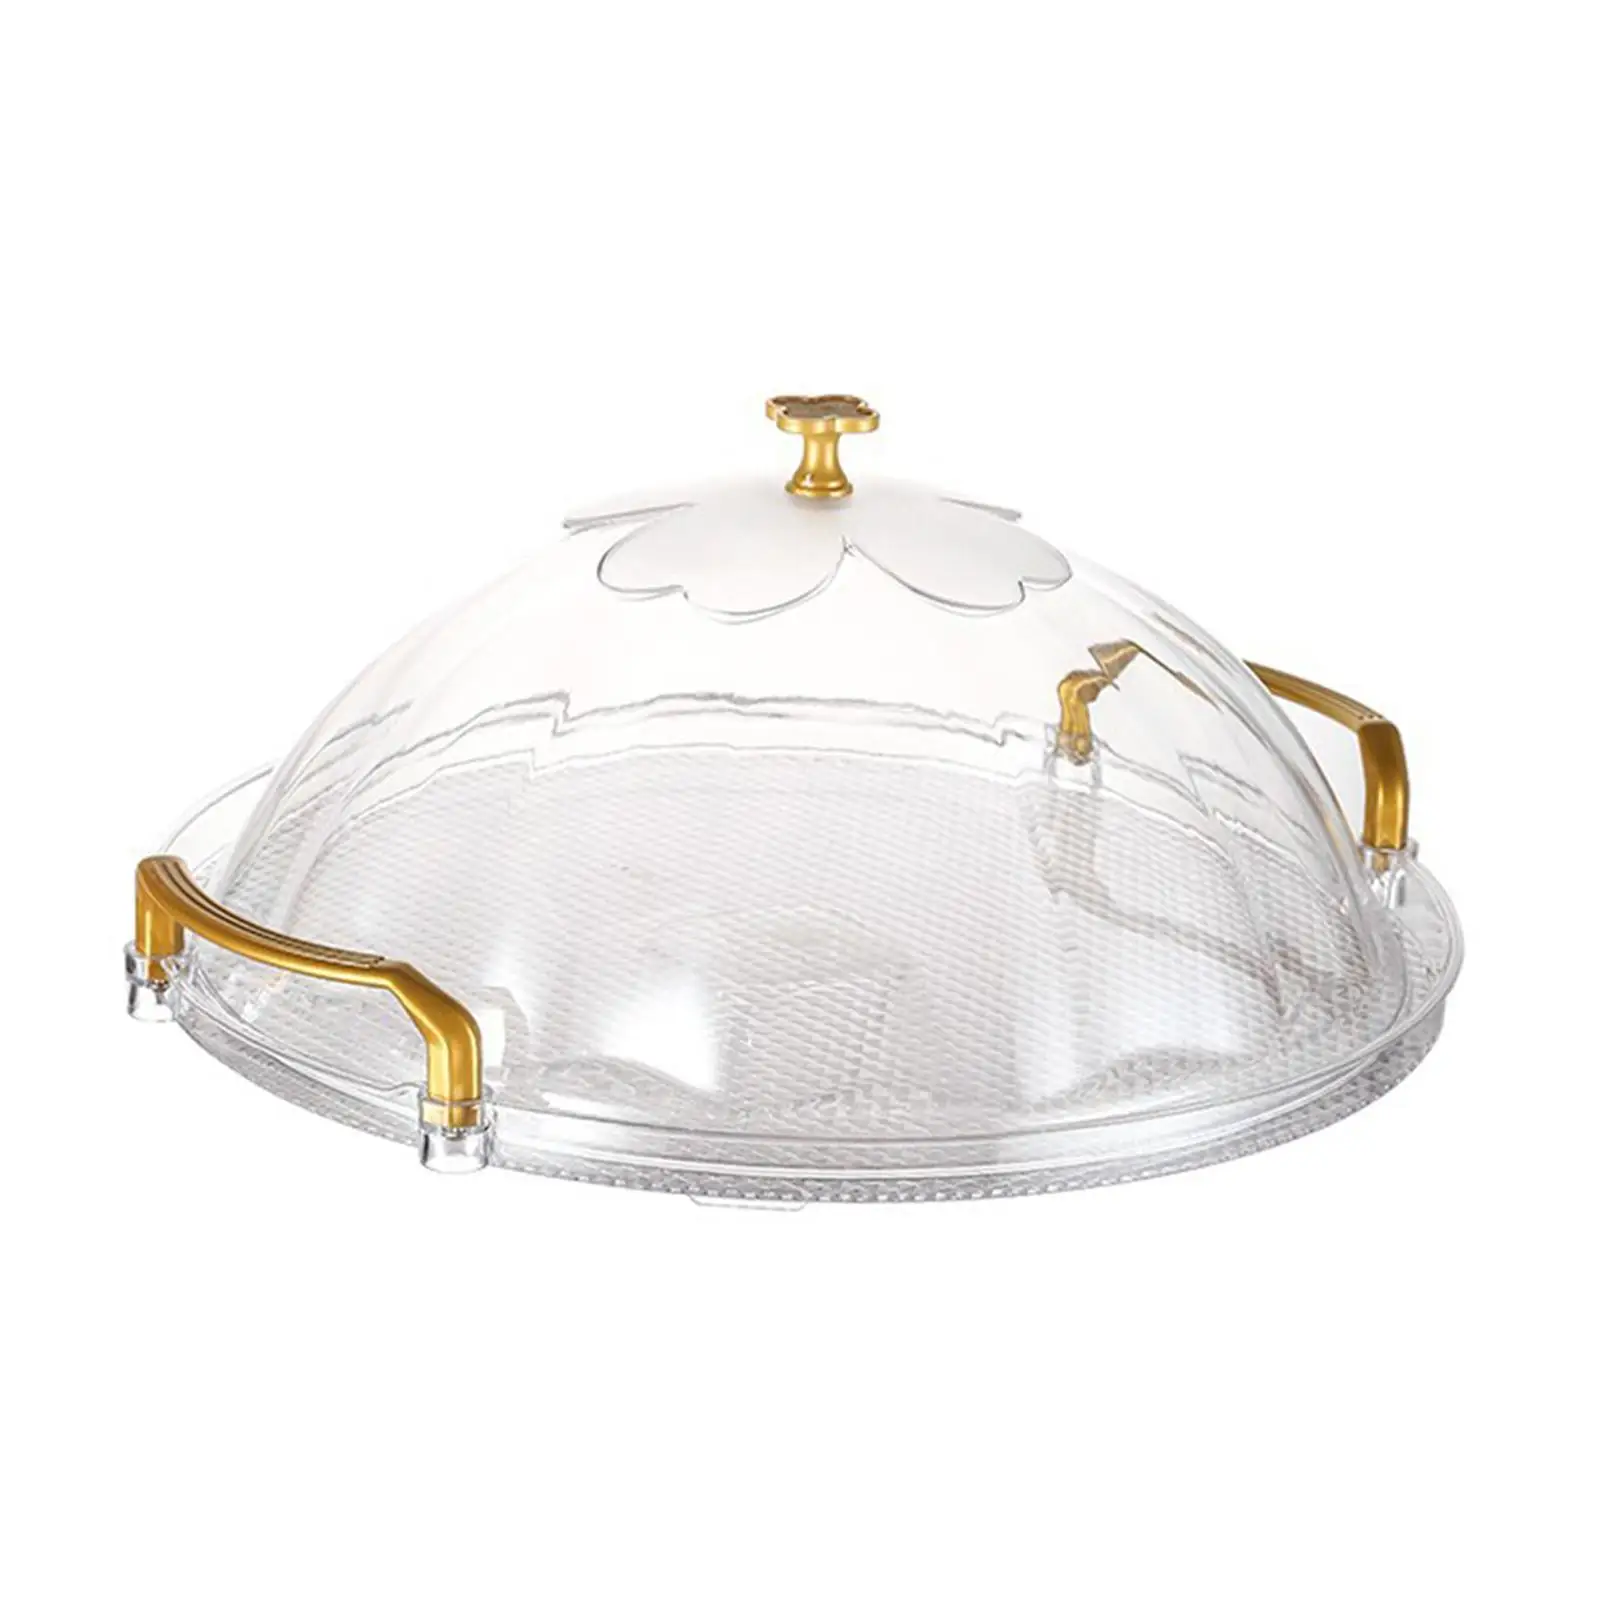 Round Serving Tray with Handle Cake Tray with Dome for Home Entertaining